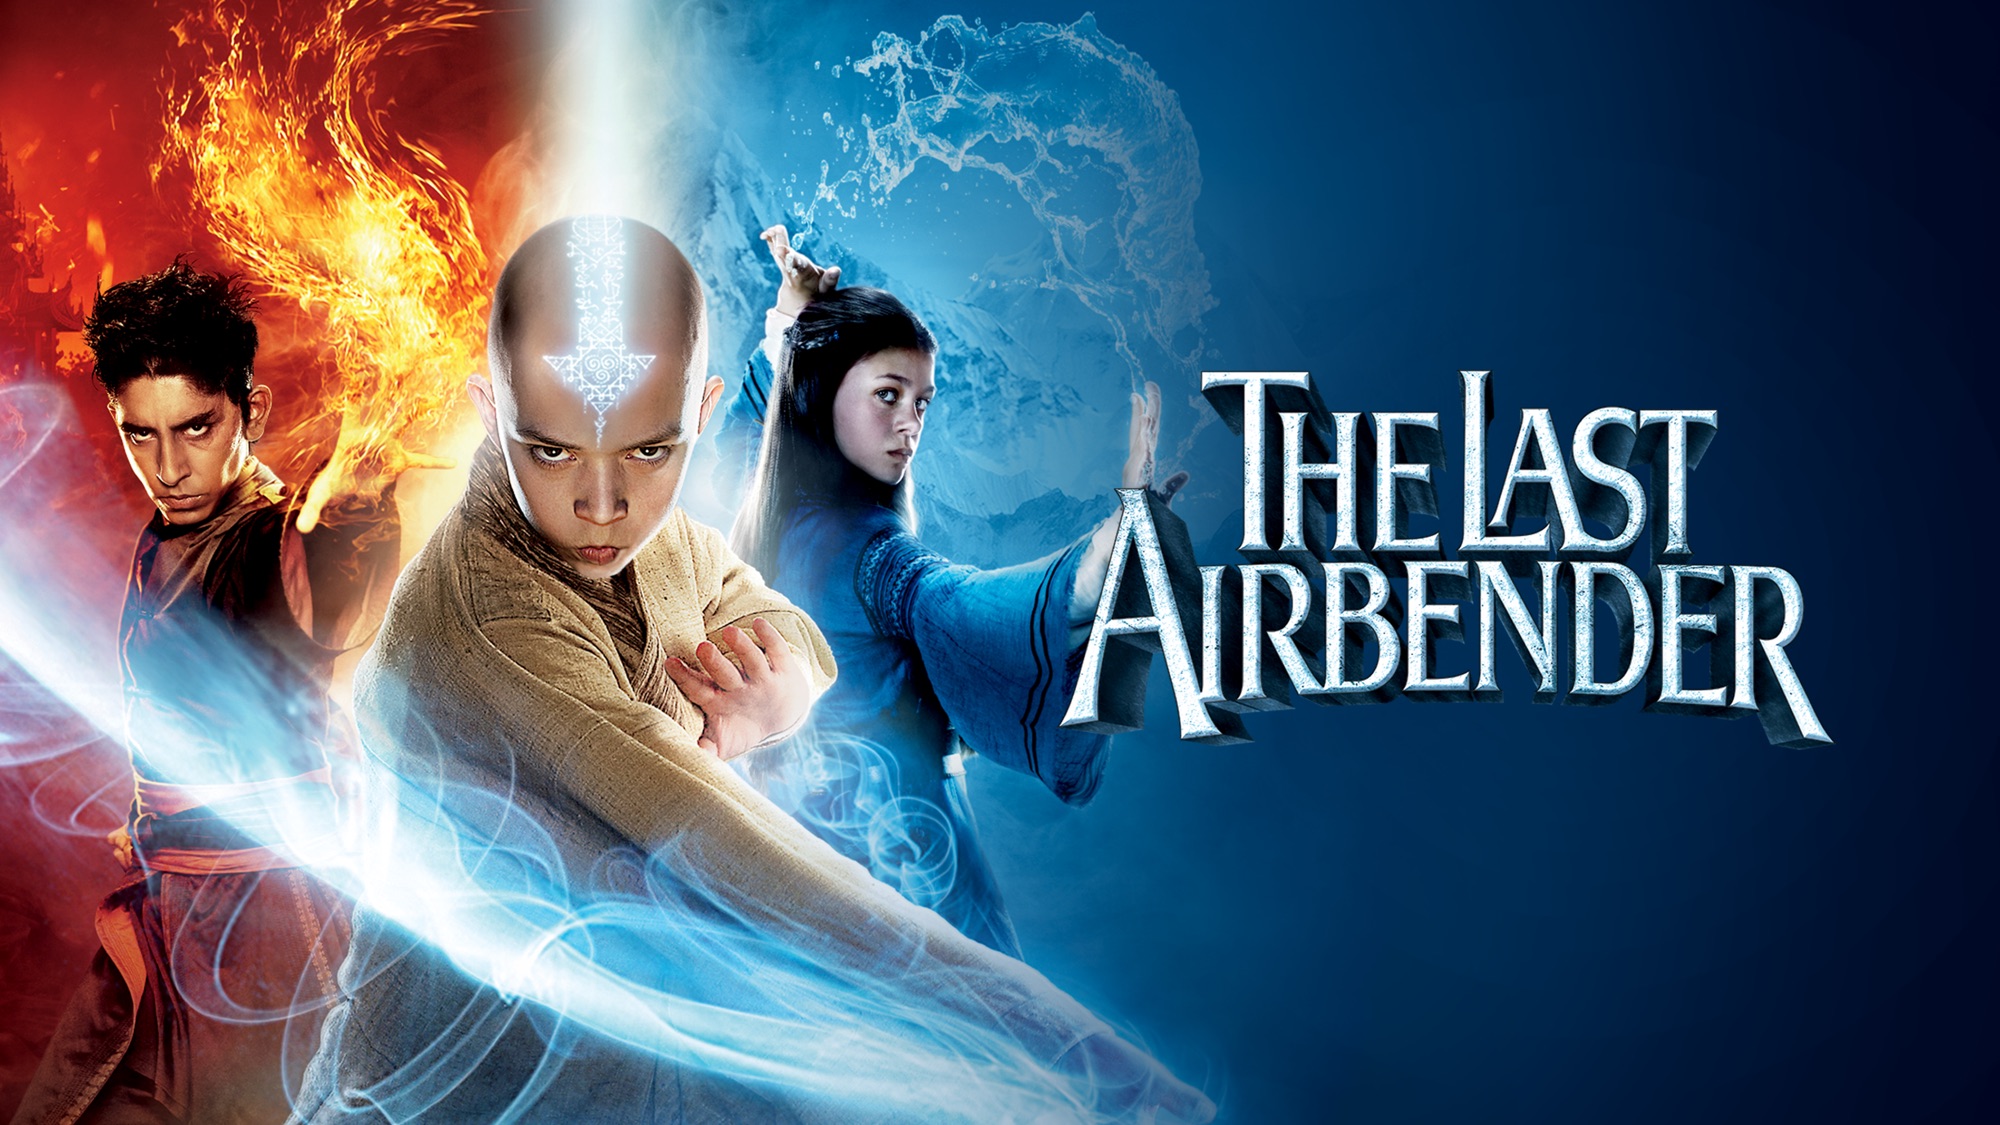 Movie The Last Airbender HD Wallpaper | Background Image